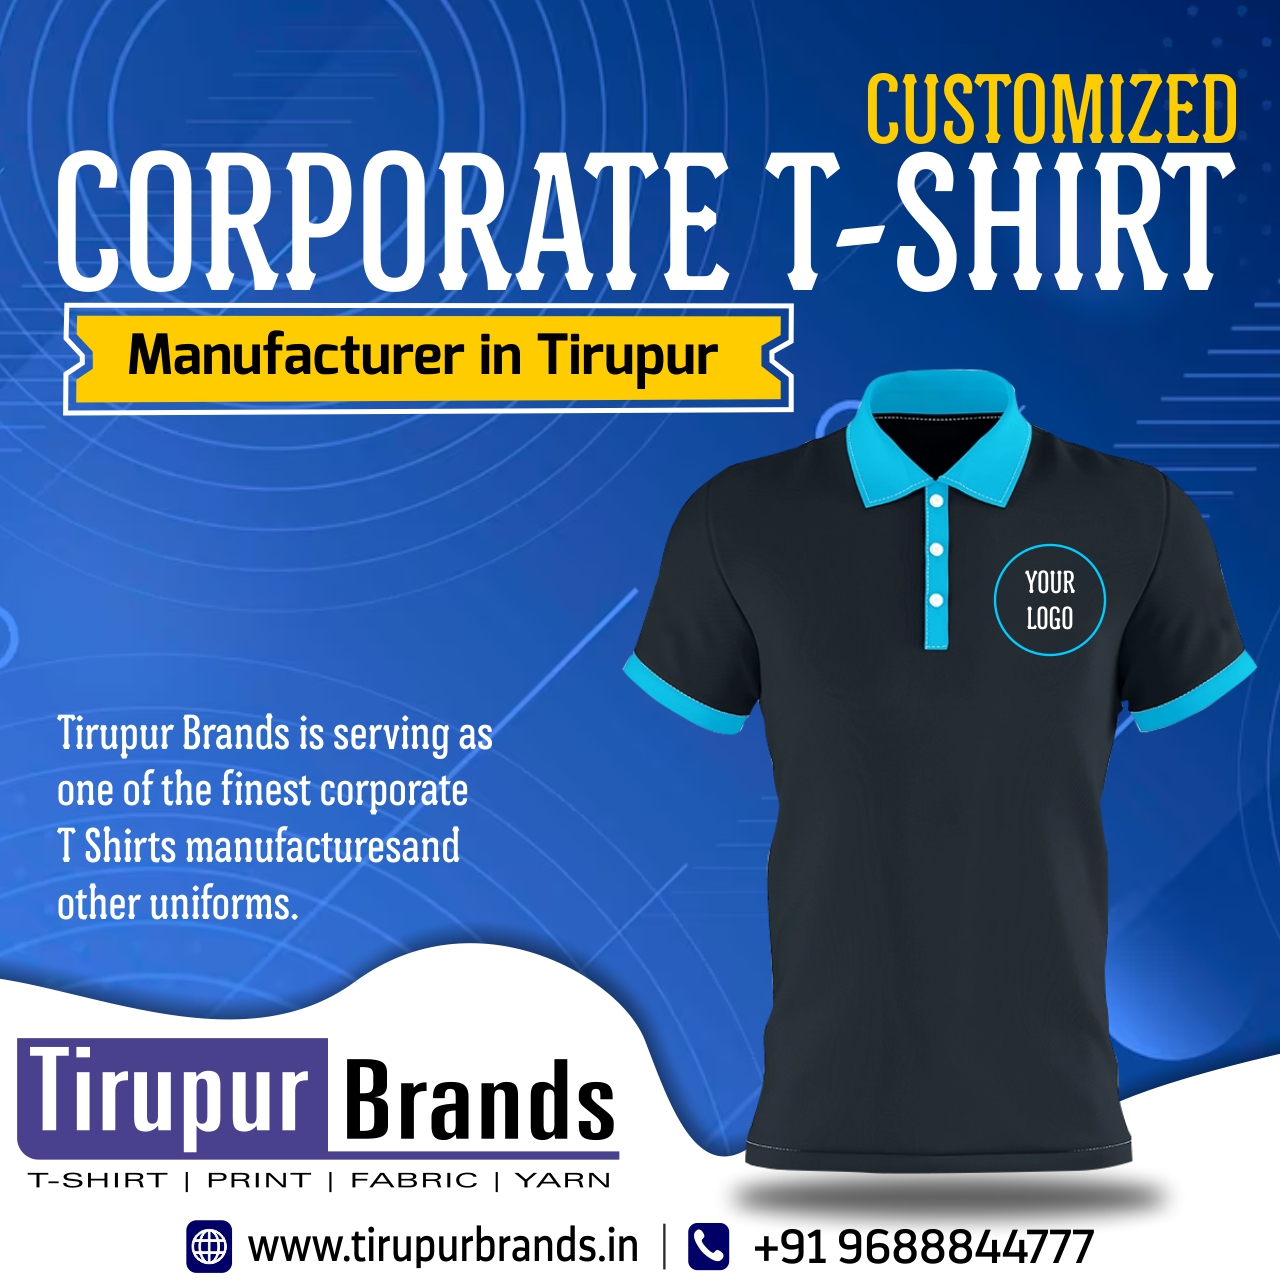 Corporate T-Shirt Exporters in India-Polo T Shirt Manufacturer-Logo Printed Corporate Wear-Corporate Gift T-Shirt Supplier India-Cotton Tees